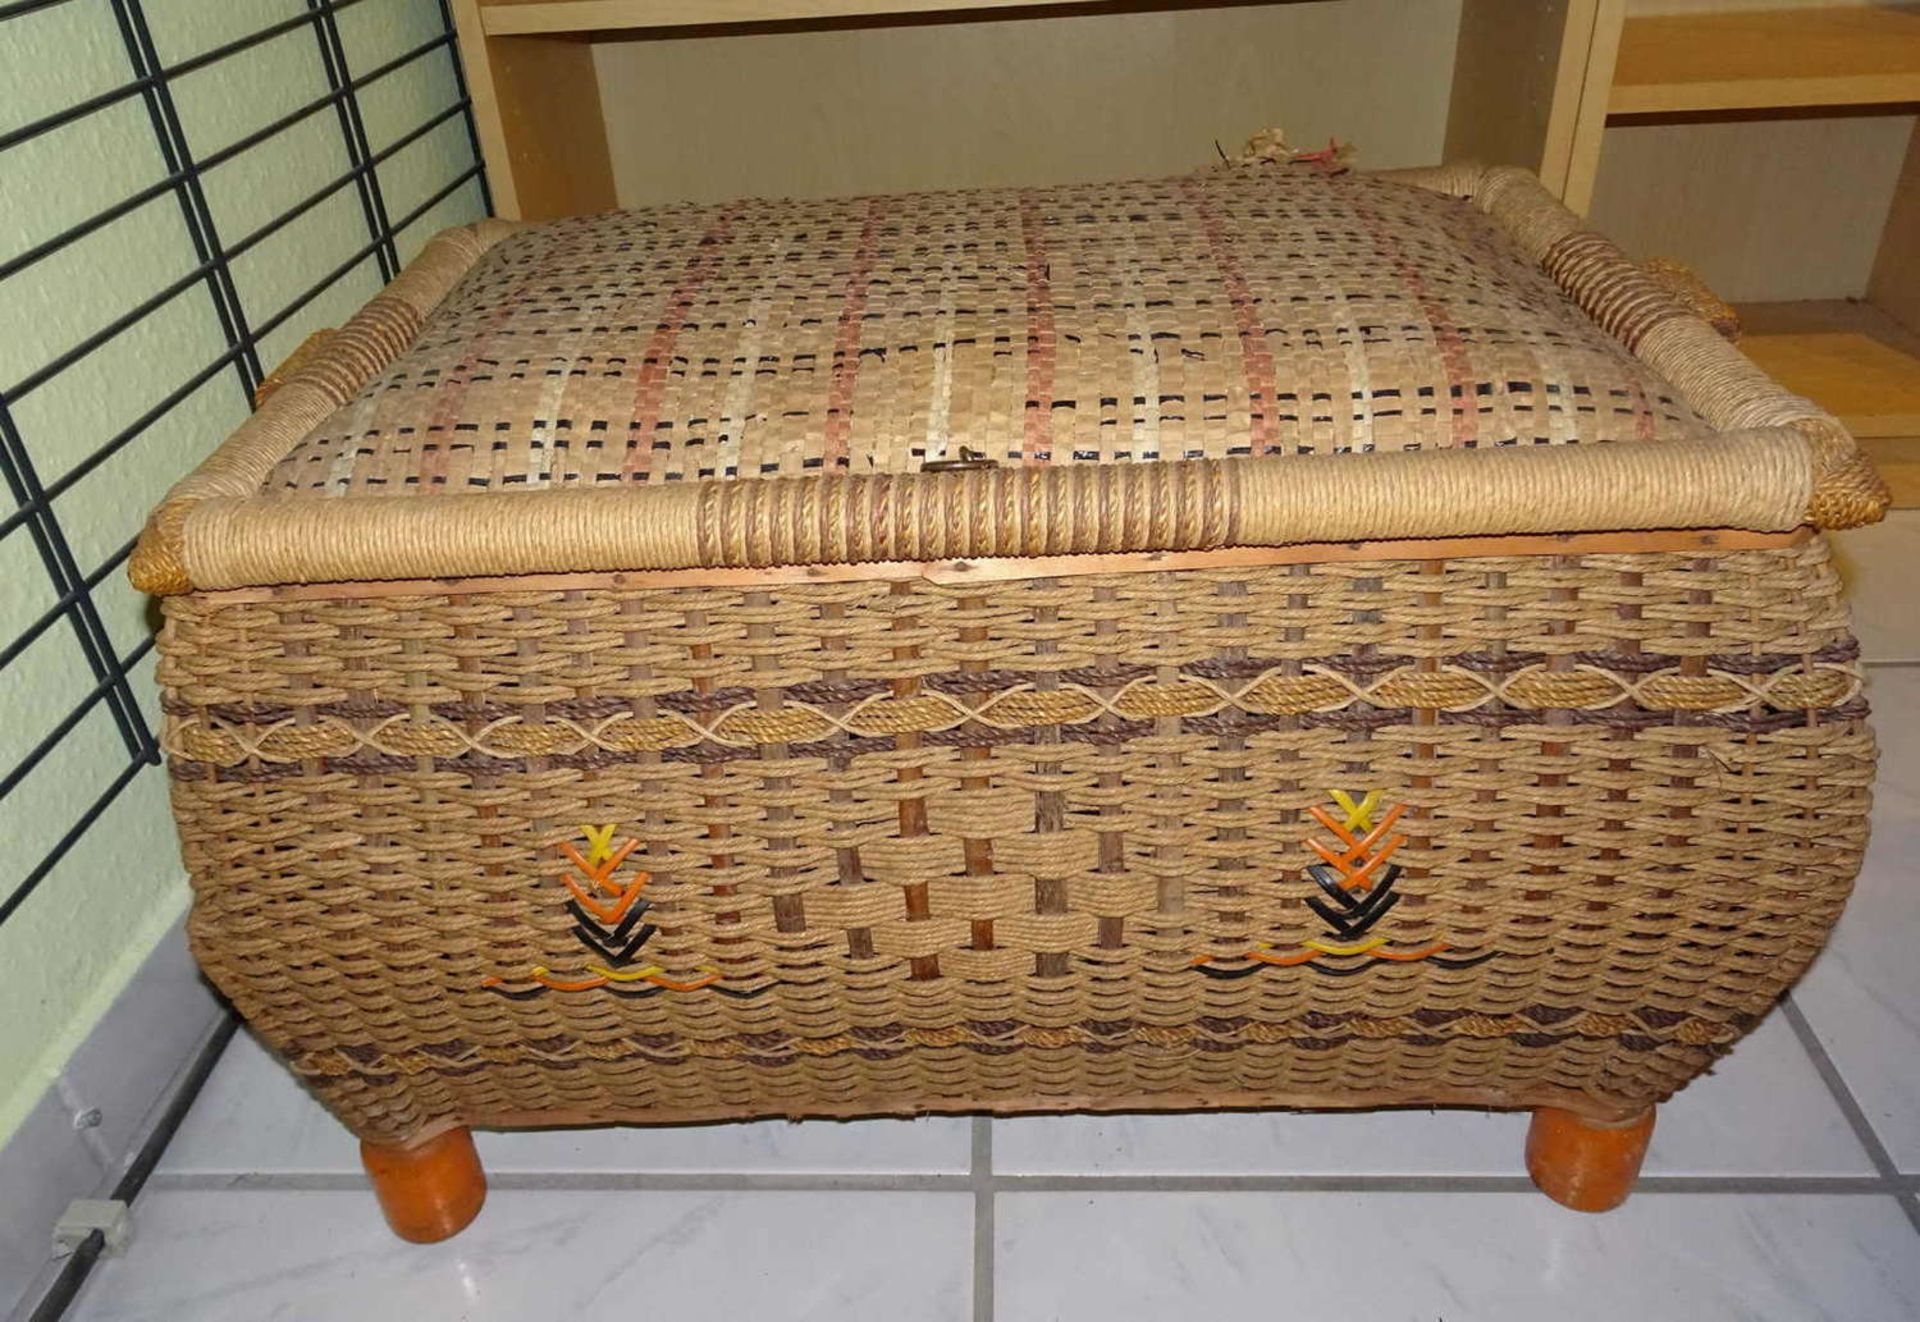 Old laundry chest made of basket and wood, as a bench. Dimensions: height approx. 42 cm, length